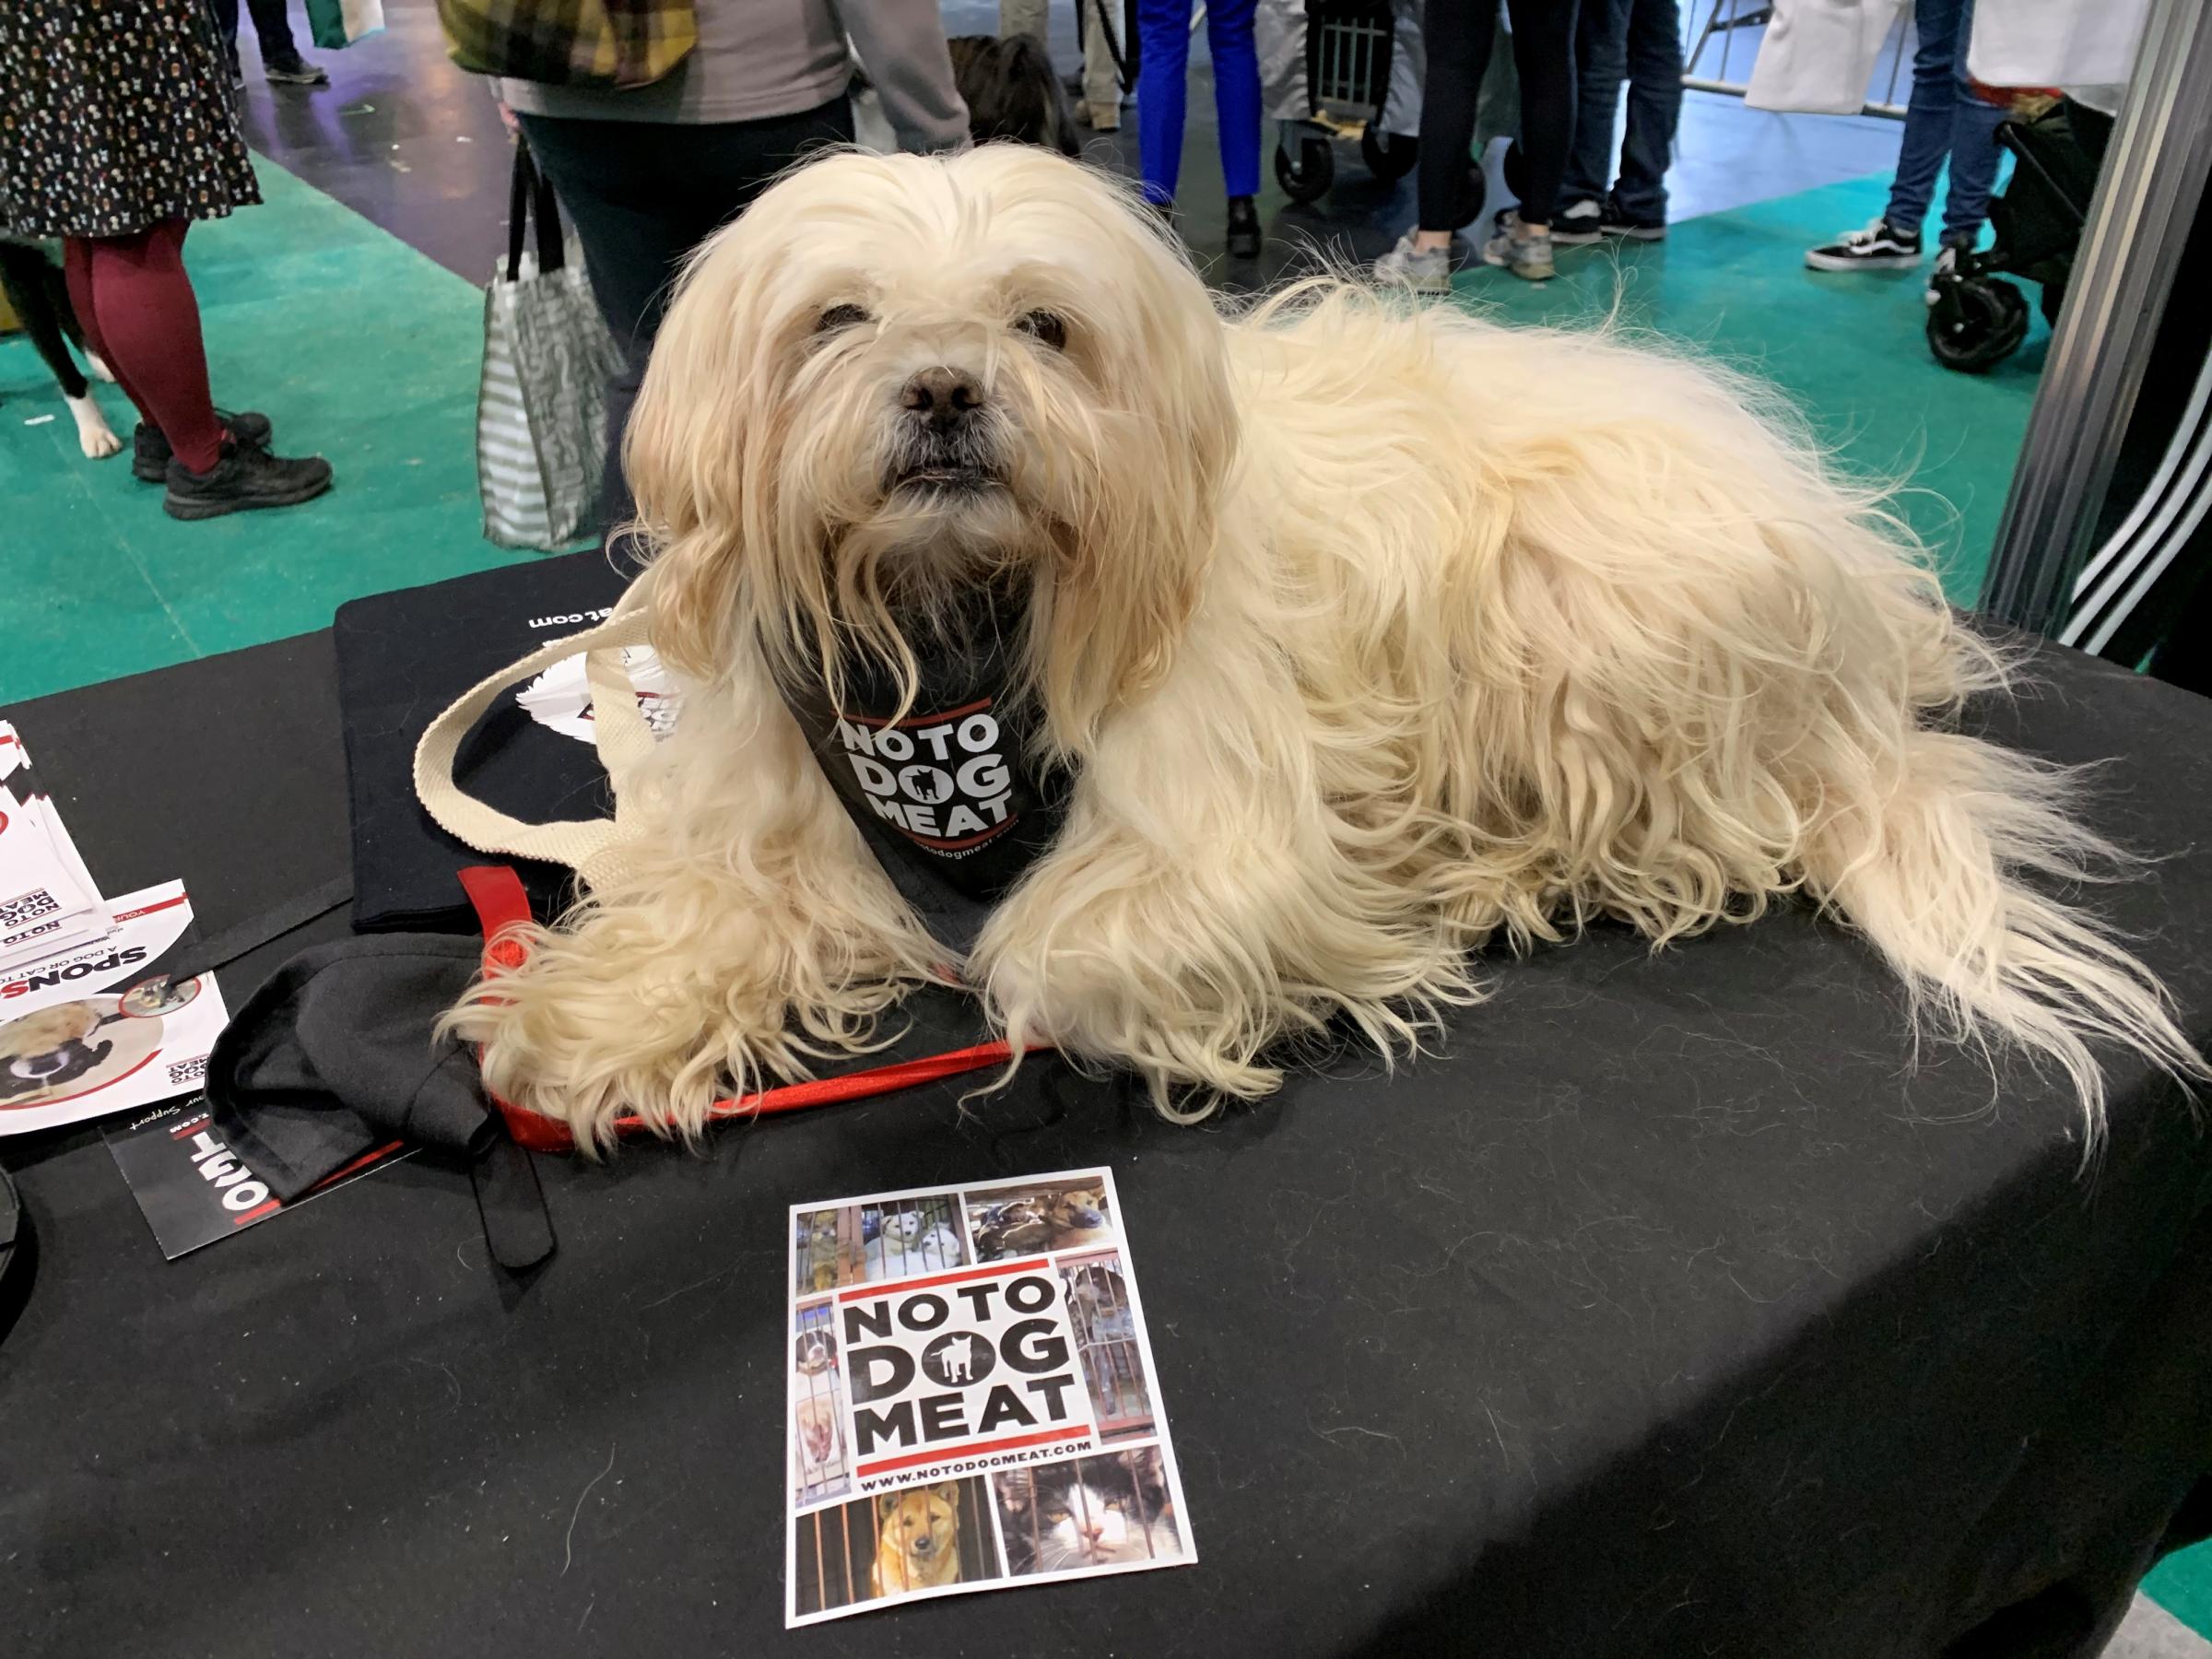 Oliver the lhasa apso at Crufts